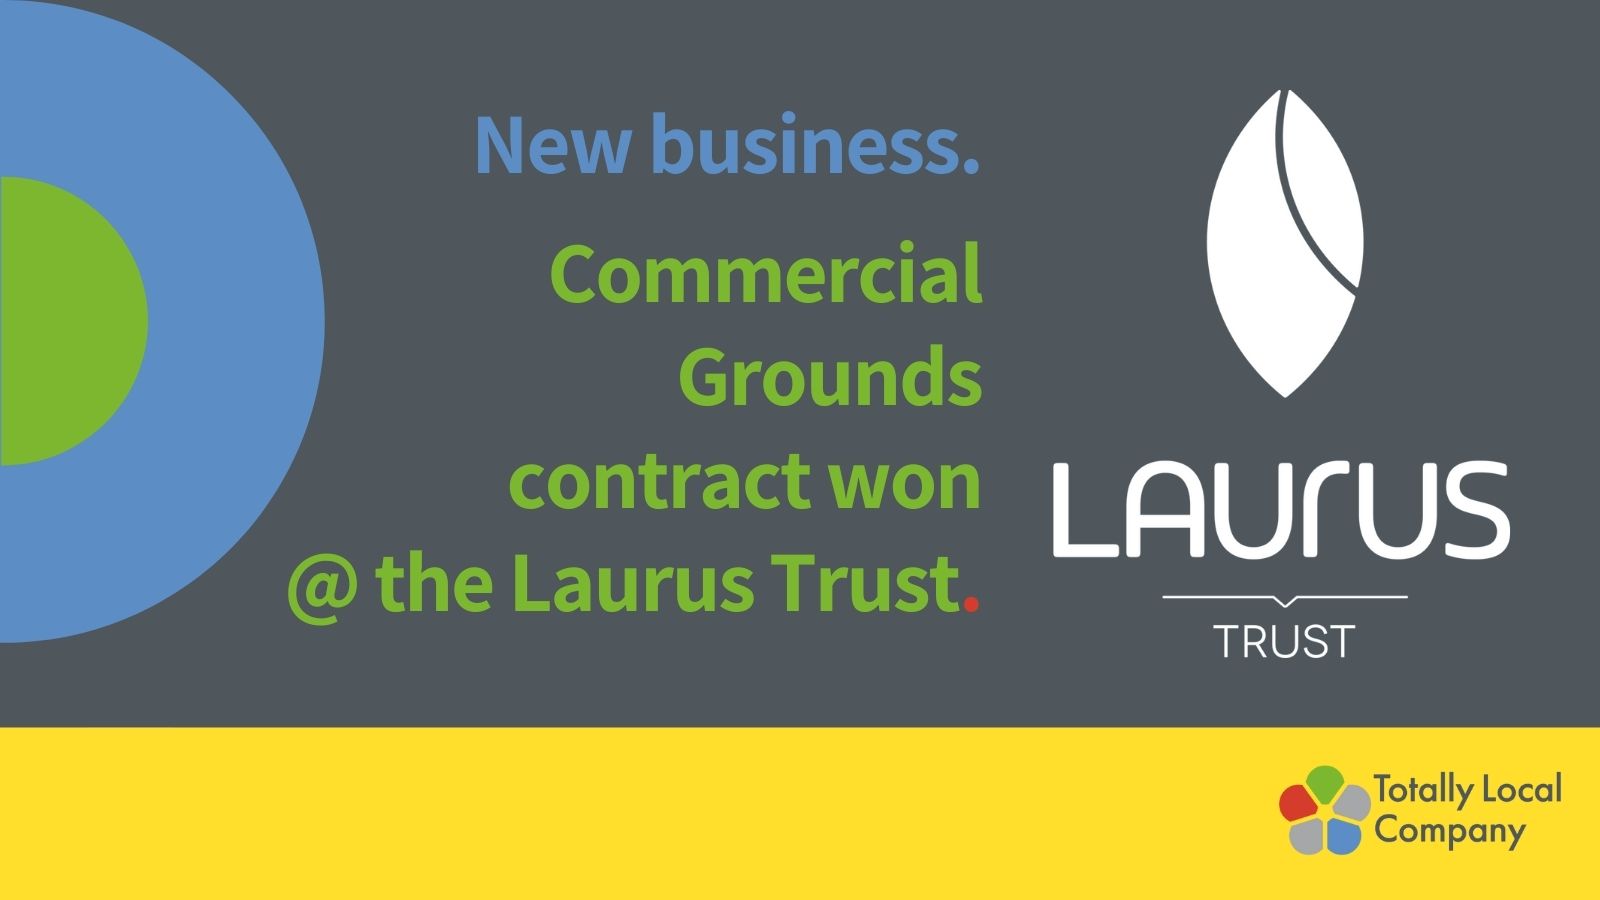 wording - new business. Commercial Grounds contract won @ the Laurus Trust with Laurus trust logo